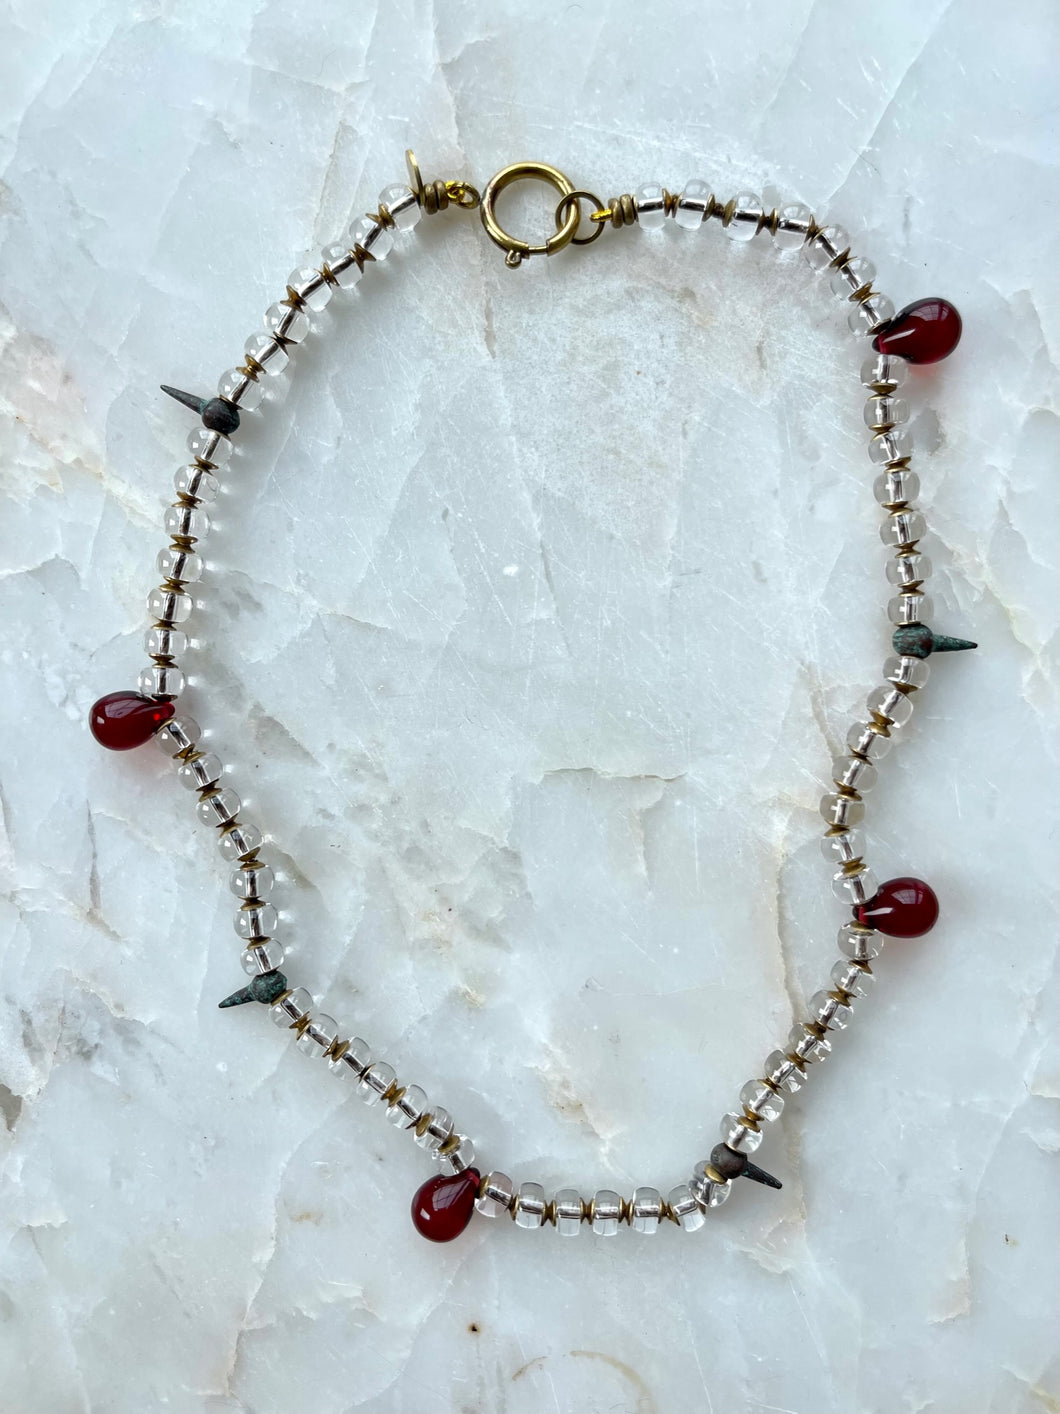 The Bloodied Bramble necklace